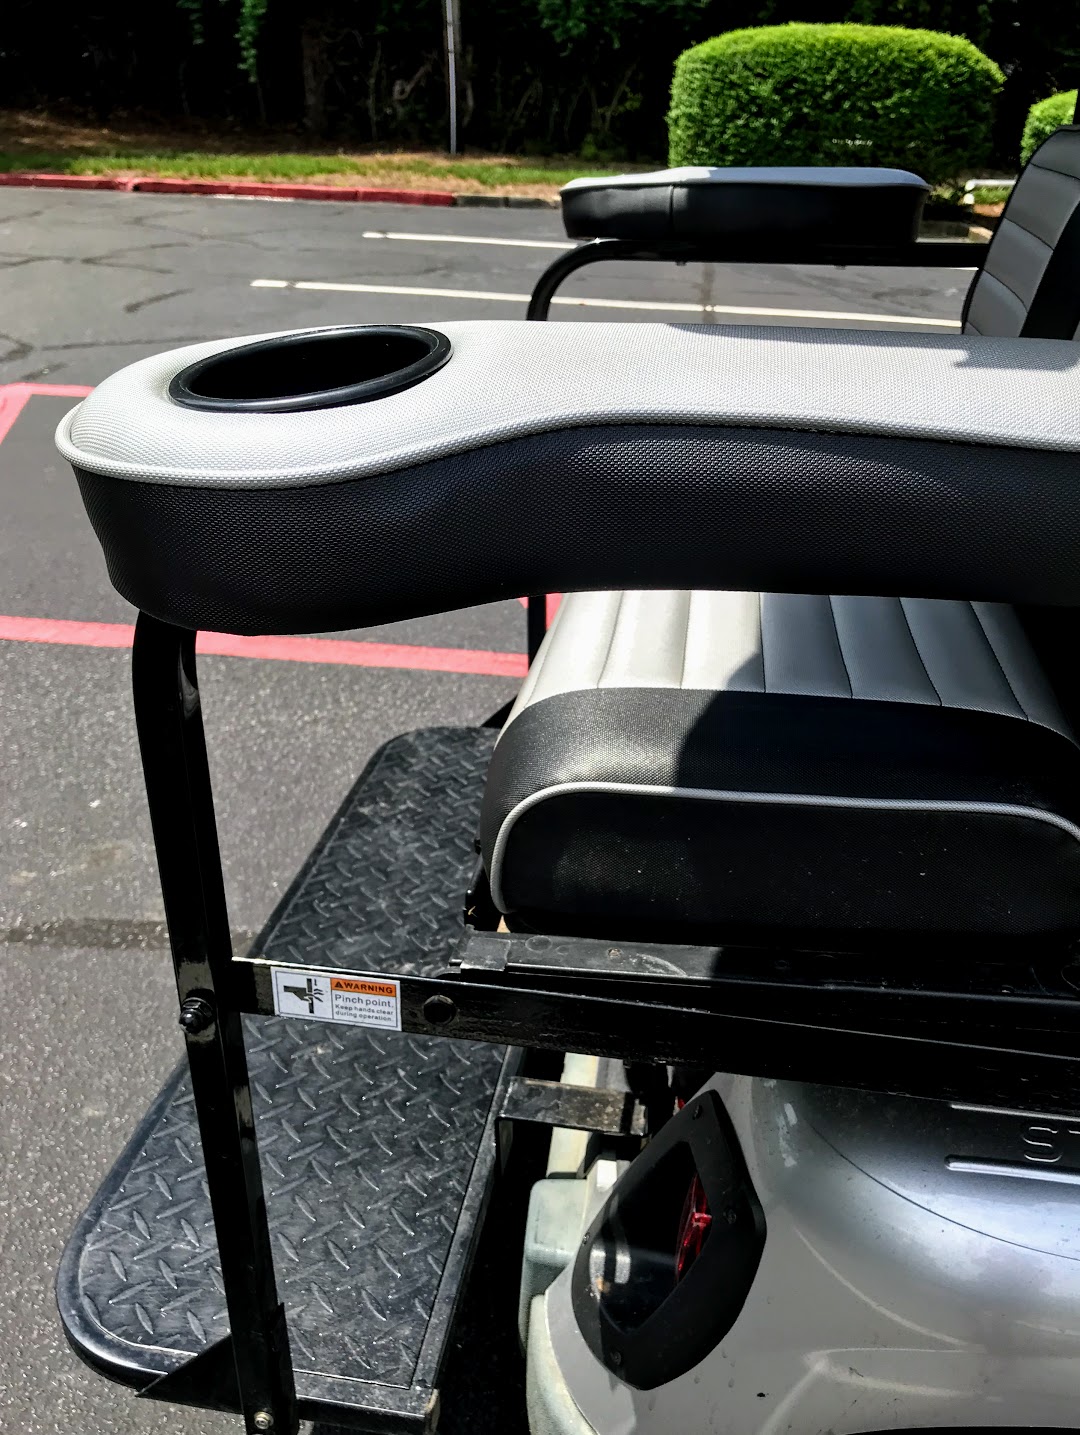 Club Car Accessory for rear seat passengers